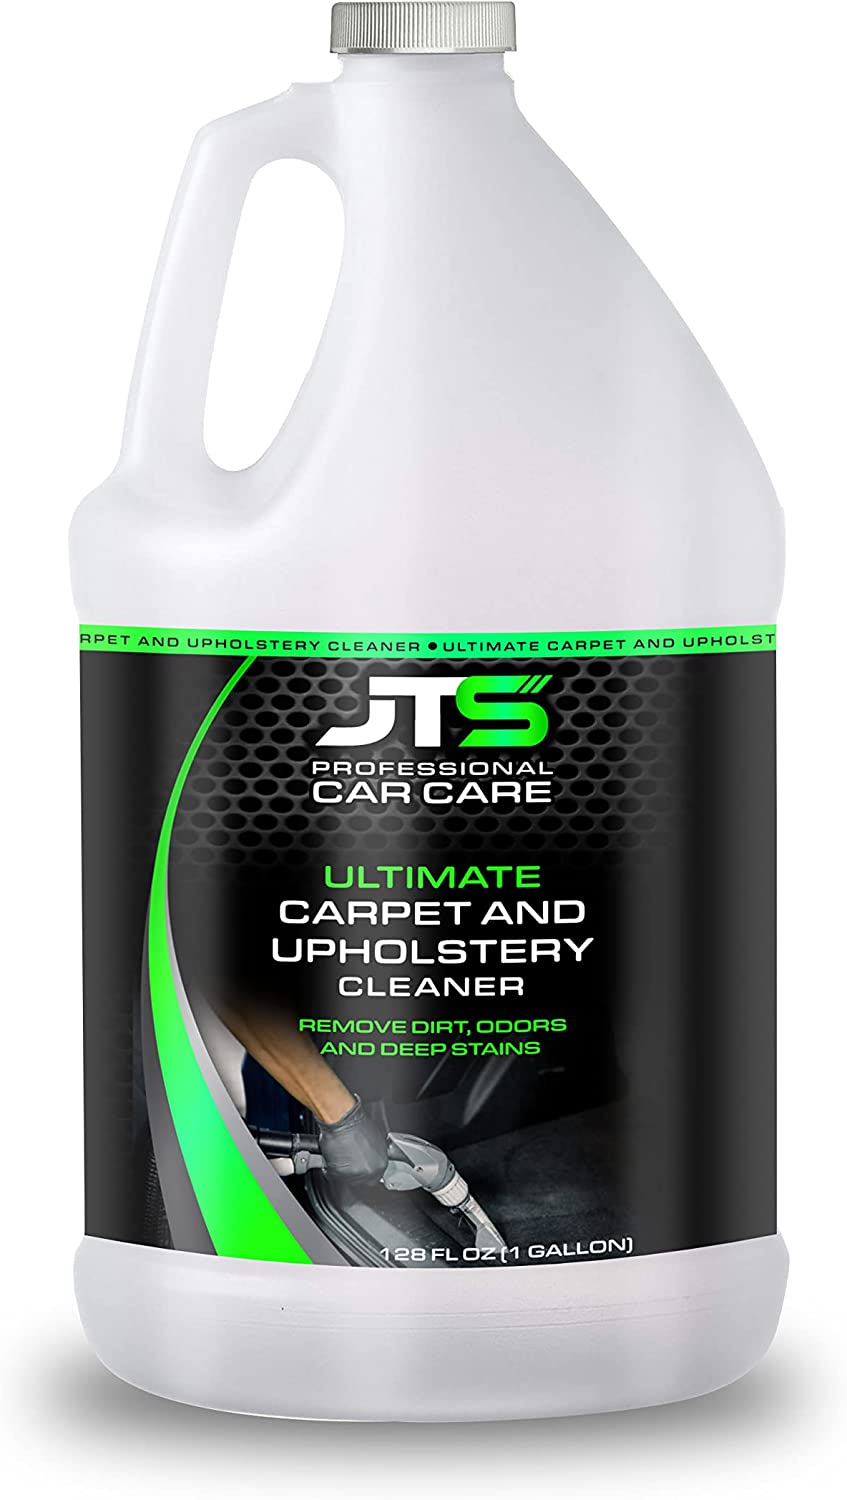 Carpet & Upholstery Cleaner - Powerful Car Carpet Cleaner For Auto